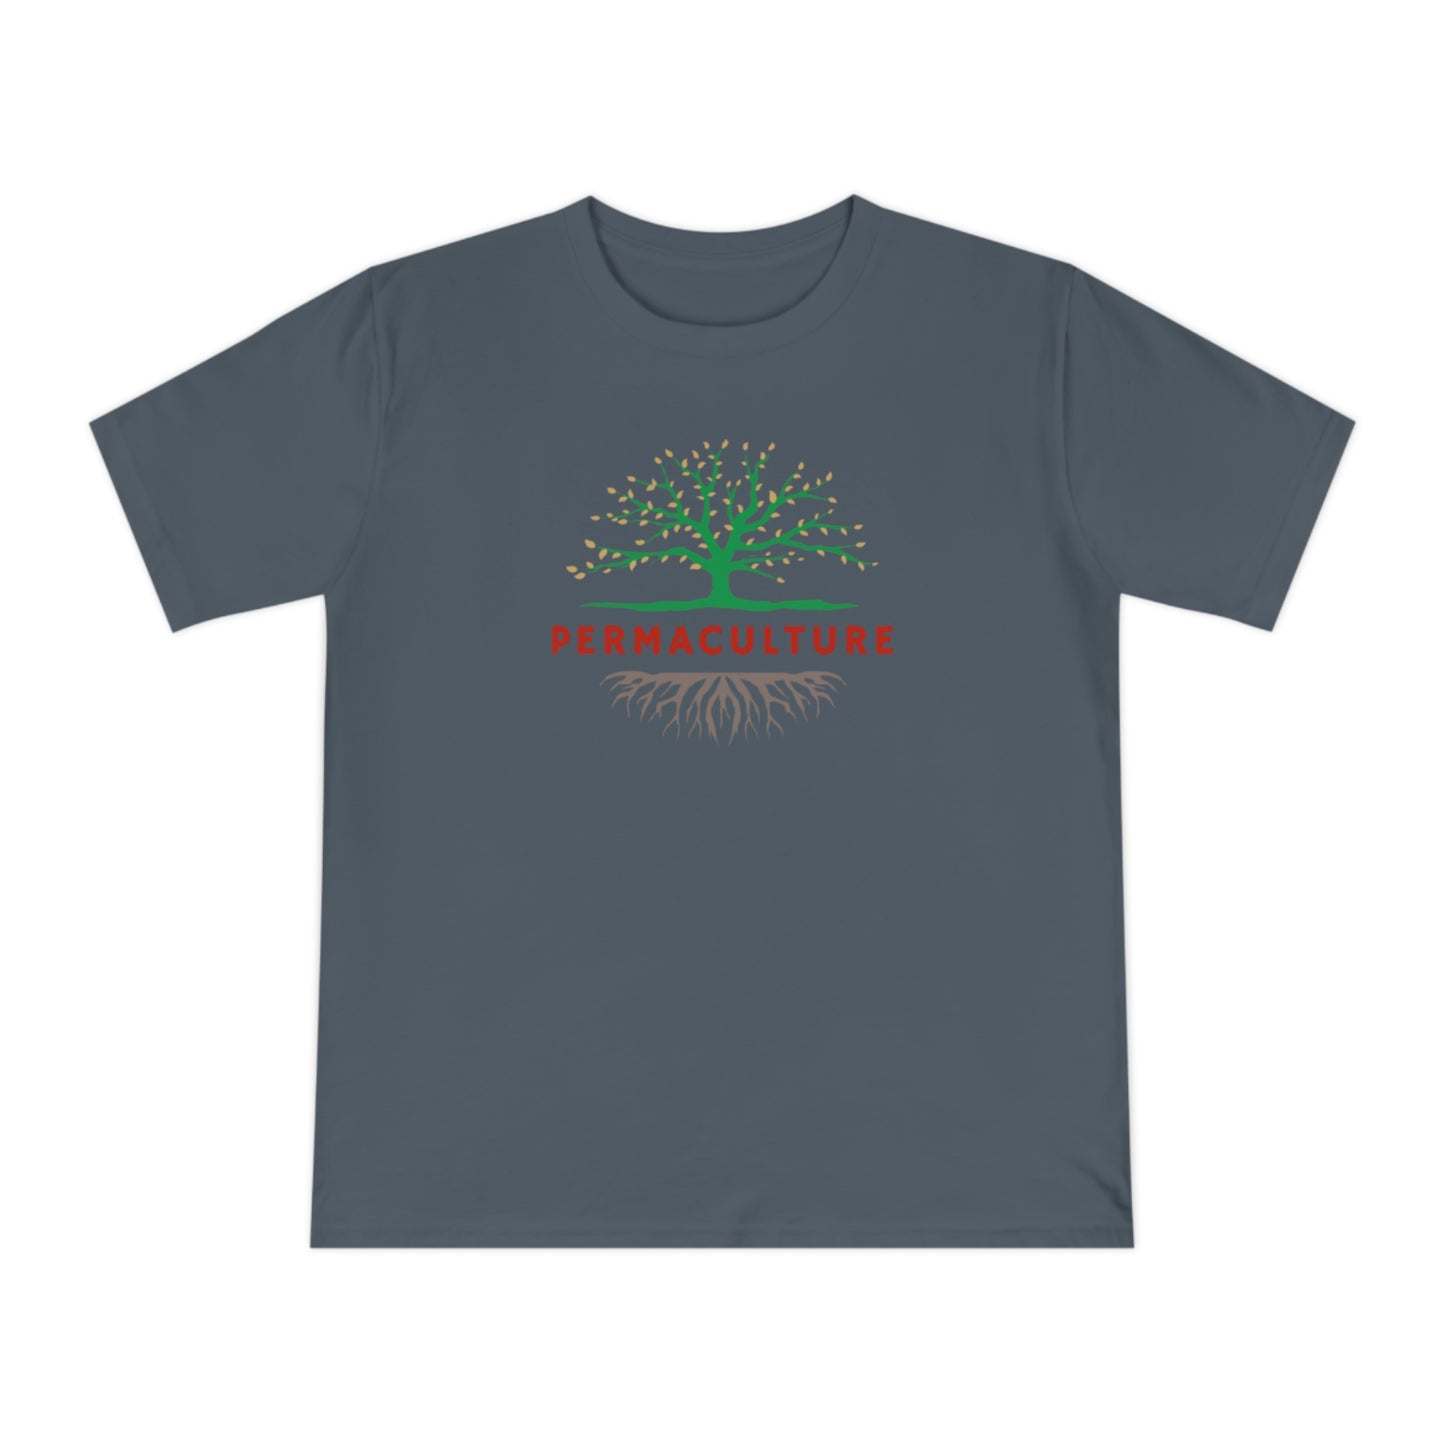 Permaculture, Unisex Classic Jersey T-shirt